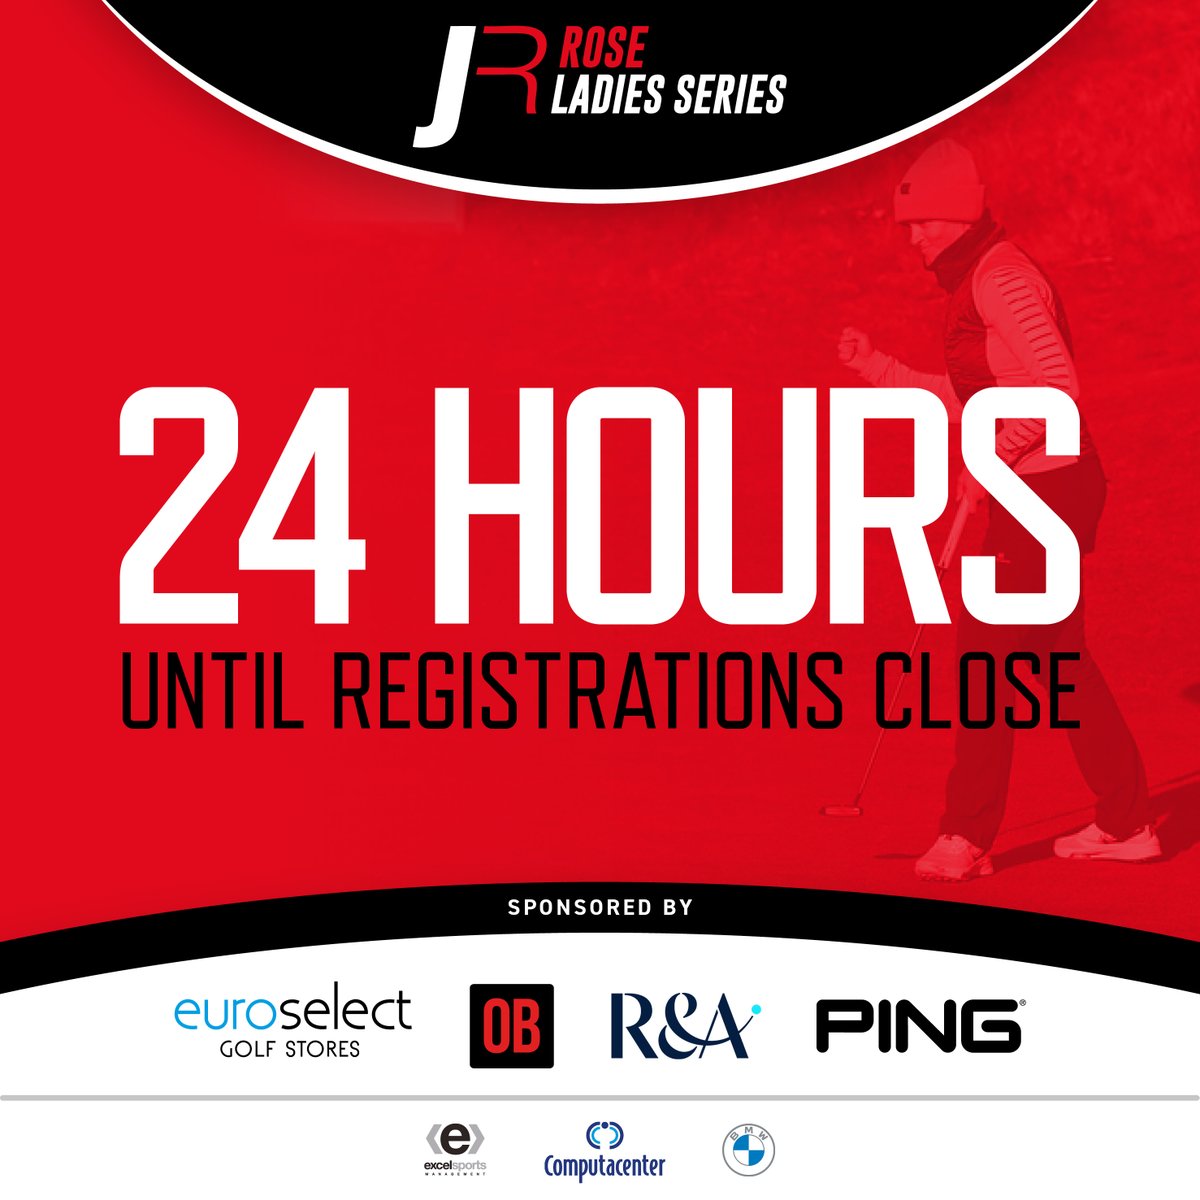 Time's running out! ⏰ Just 24 hours to secure your spot in the 2024 Rose Ladies Series. Register ASAP via the link in our bio! #RoseLadiesSeries